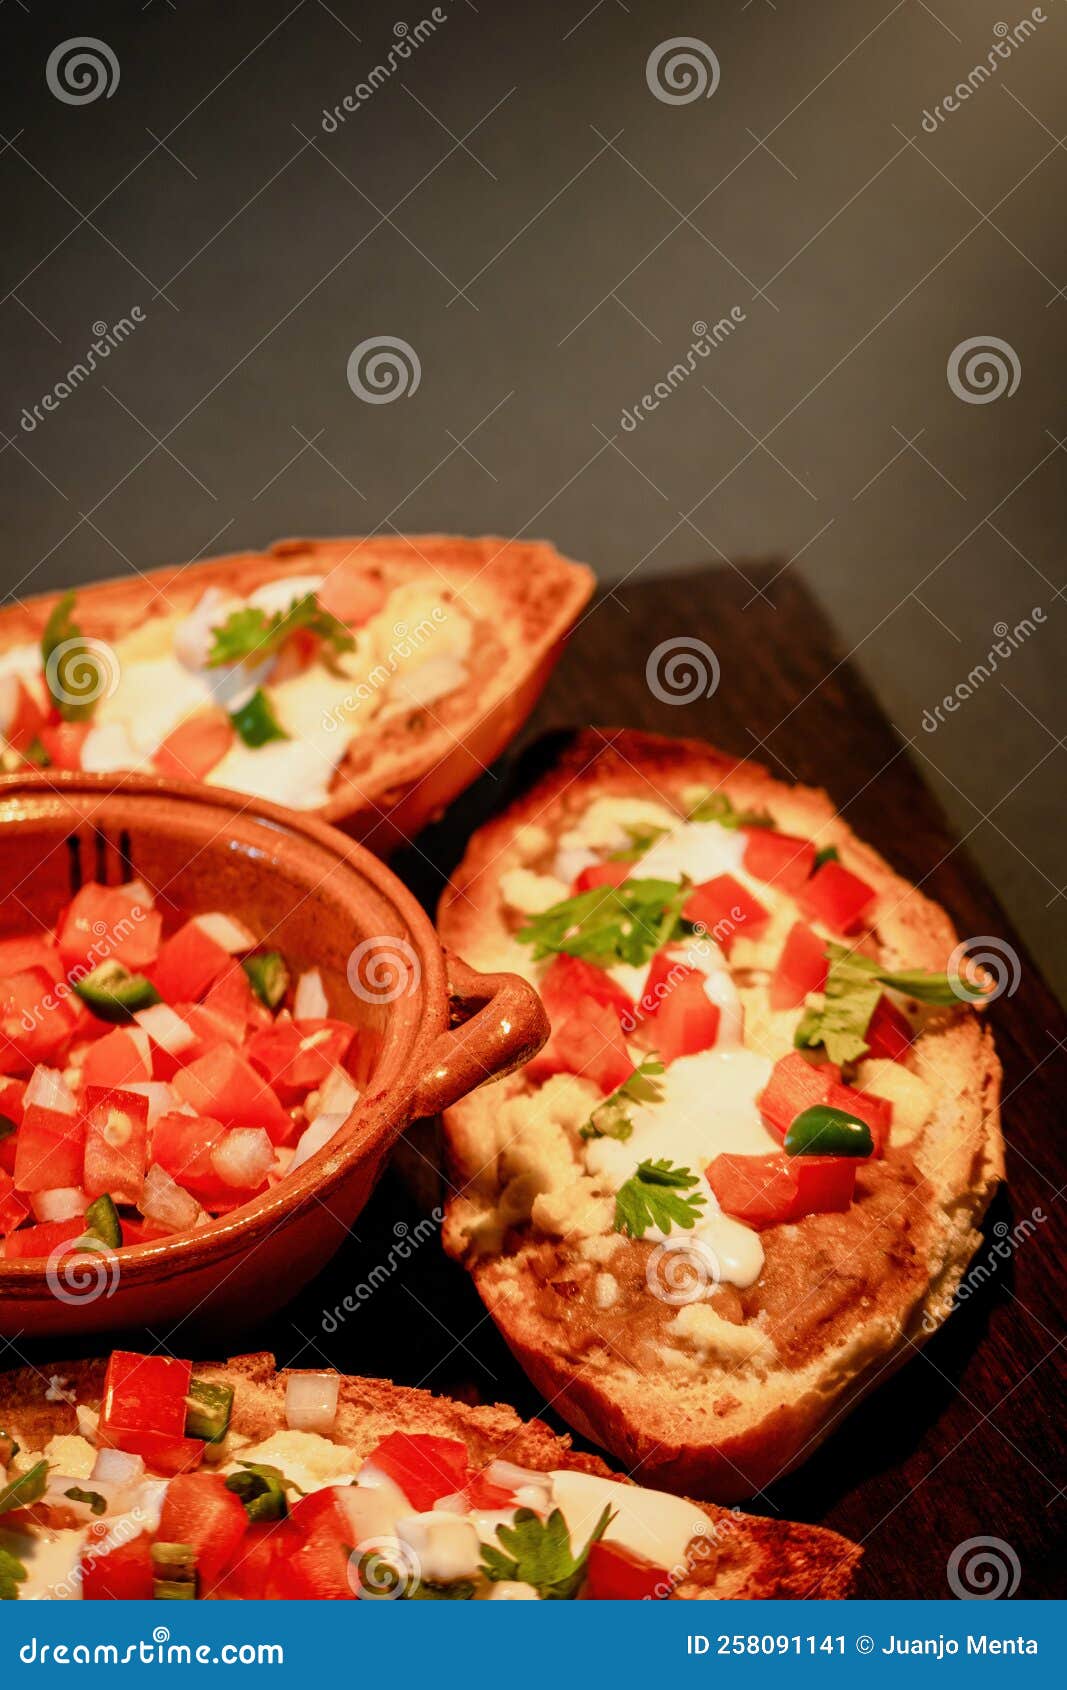 Mexican Molletes, Traditional Food with Bread, Beans, Cheese, Tomato ...